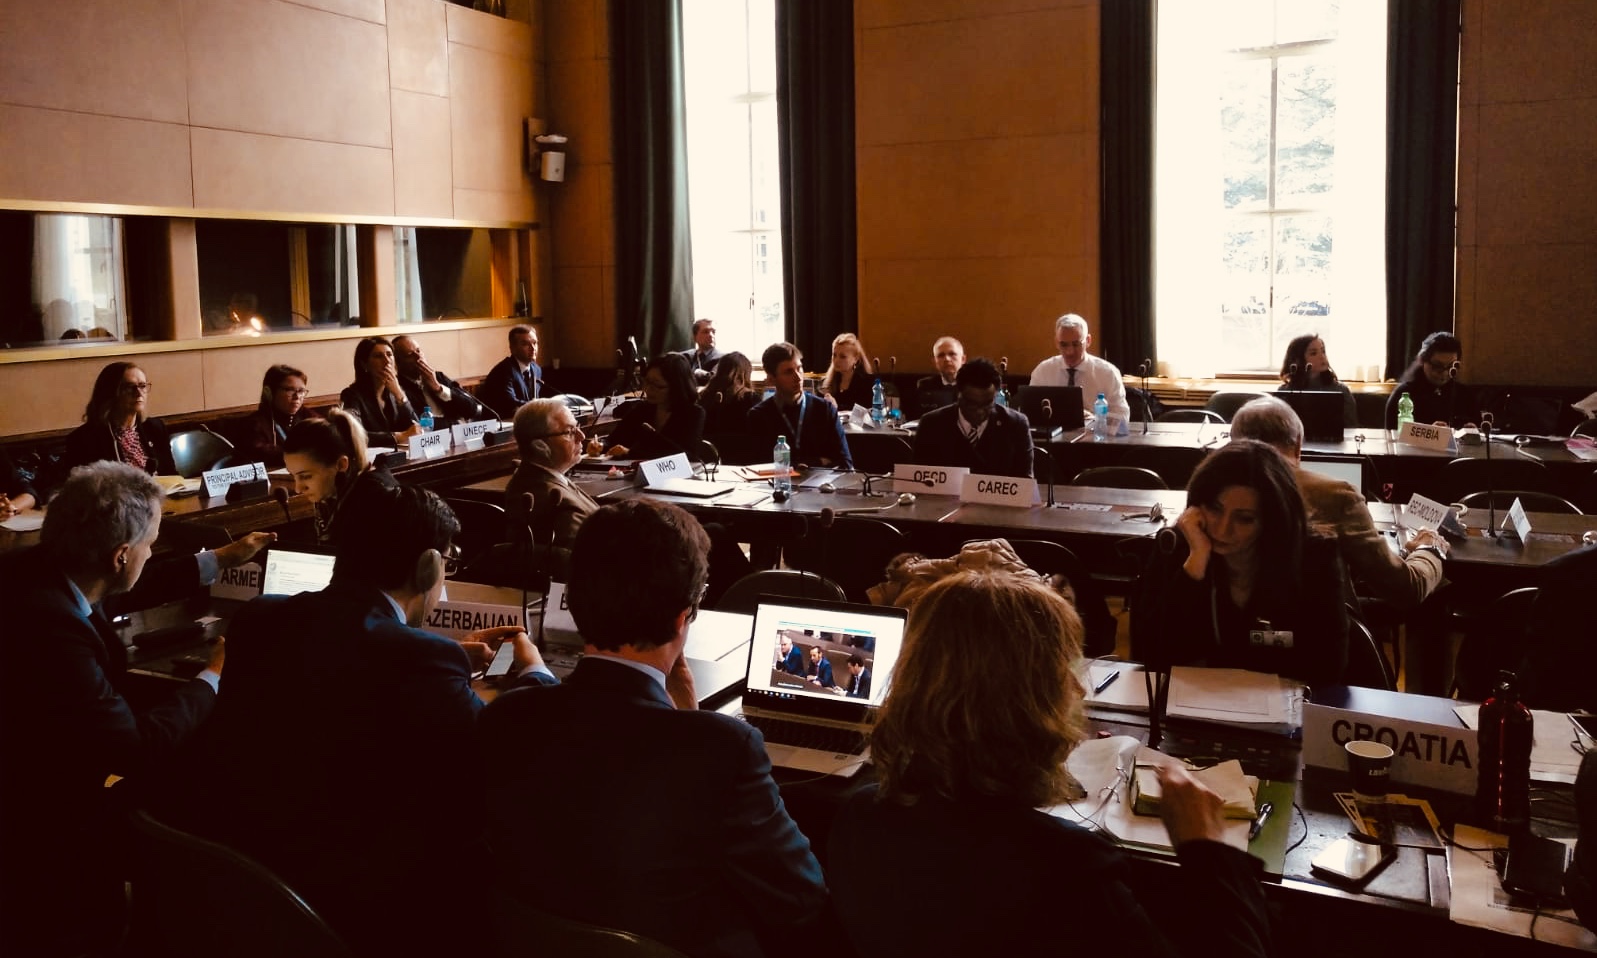 29-31 January 2019 | 24th session of the UNECE Committee on Environmental Policy (CEP)